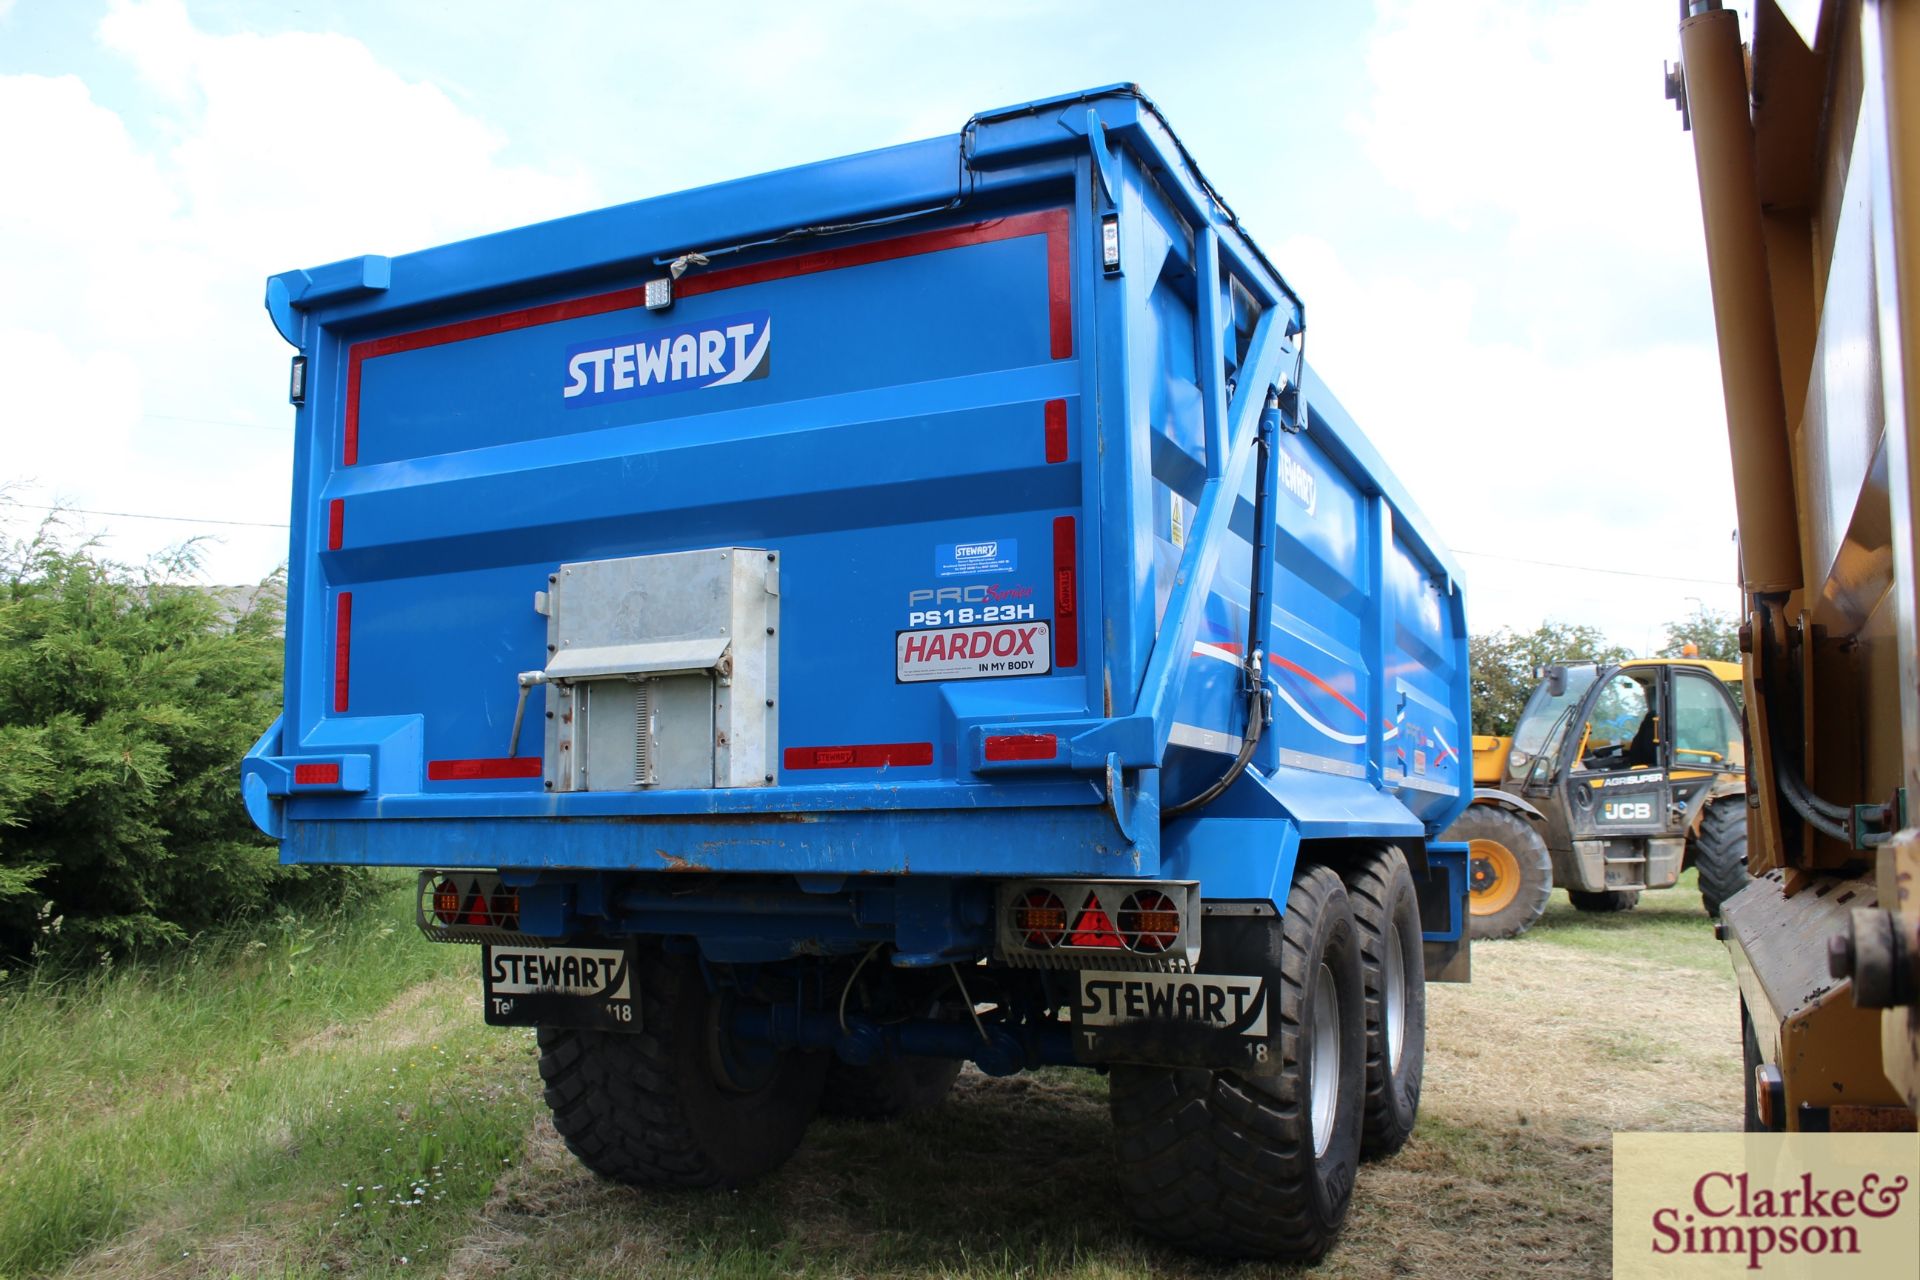 **CATALOGUE CHANGE** Stewart Pro Series 18-23H 18T twin axle tipping trailer. 06/2020. Serial number - Image 6 of 40